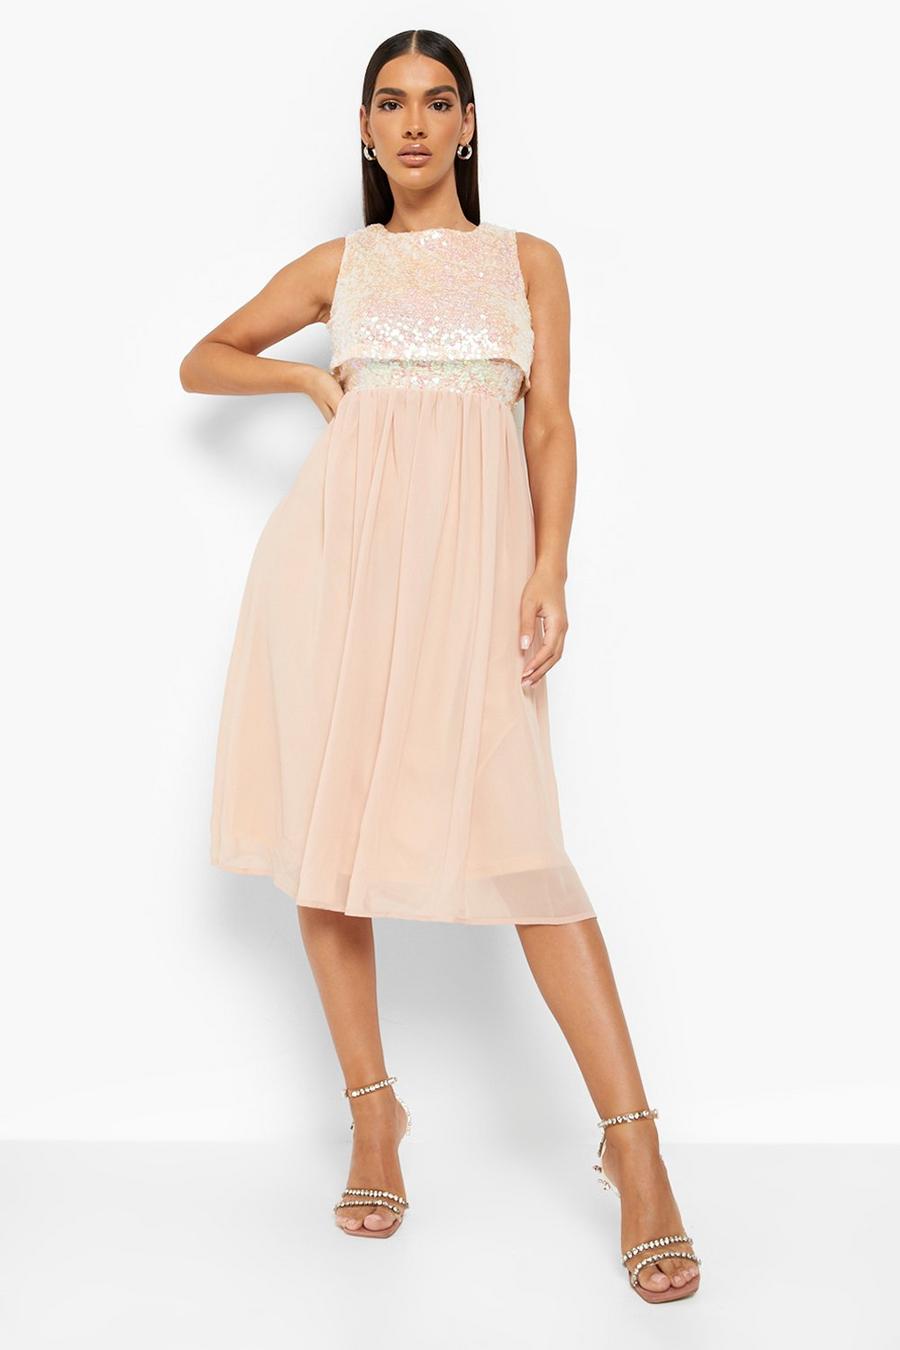 Champagne beis Double Layer Sequin Midi Skater Dress